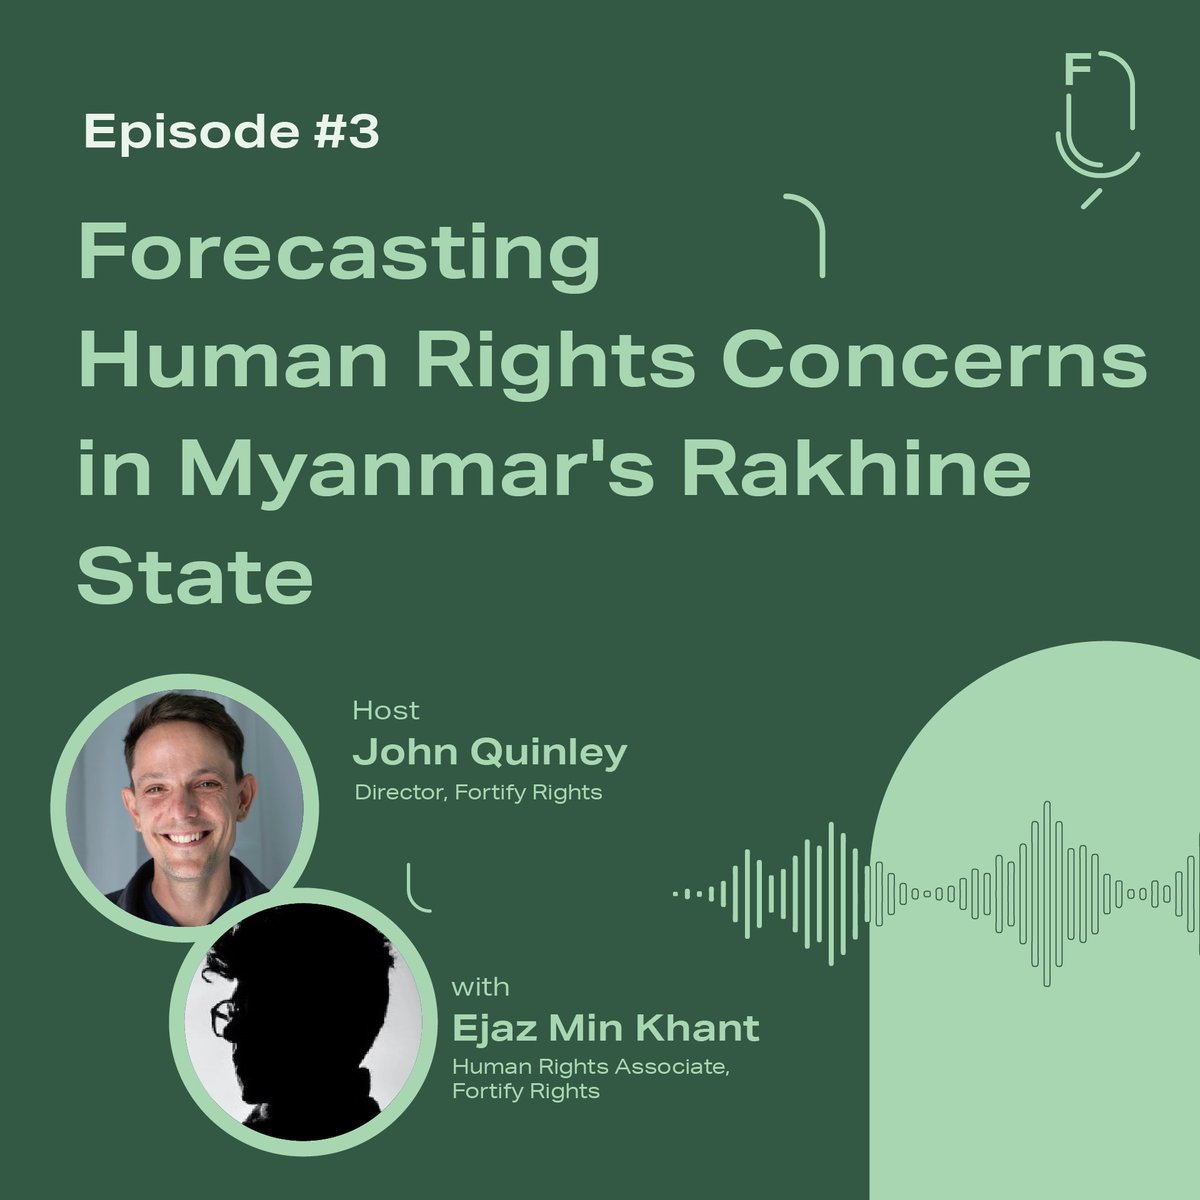 🔊NEW EPISODE: As the situation facing #Rohingya in Myanmar’s Rakhine State worsens, @john_hq3 talks to @ejaz_minkhant, Human Rights Associate at @FortifyRights, about what must be done to end the human rights violations. Listen to #TheForecast here: youtu.be/C3jg7GePKwA?si…